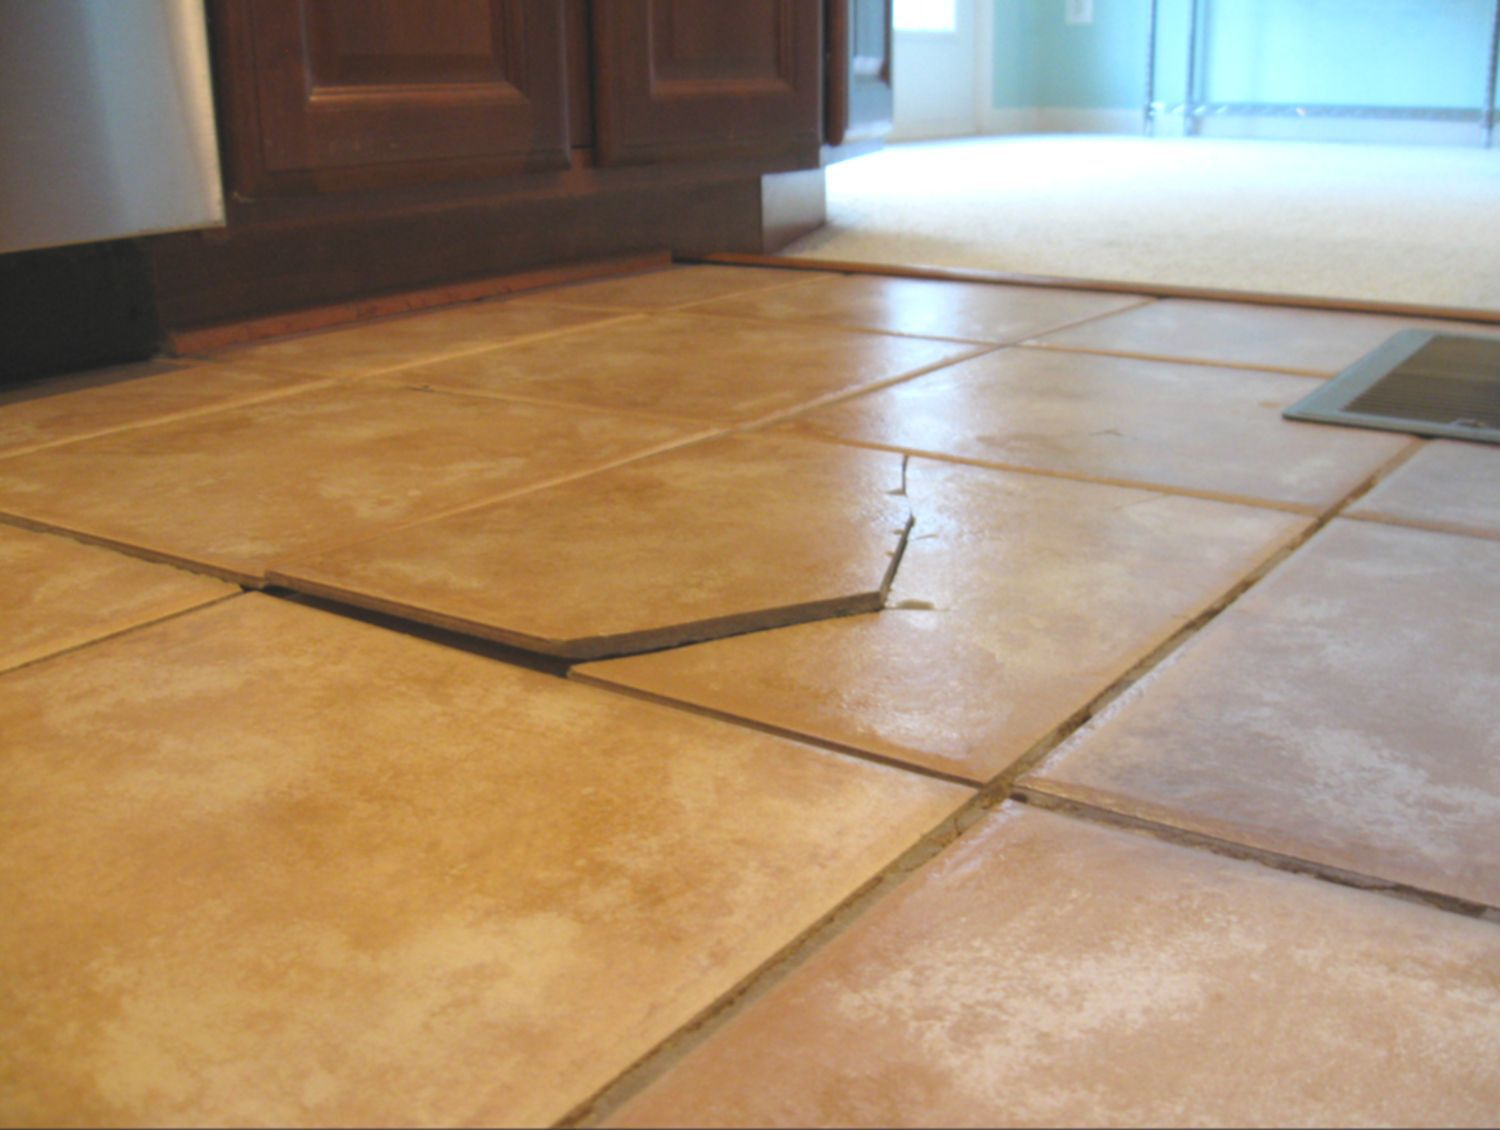 7 Reasons For Cracked Tile On Floors And Walls with sizing 1500 X 1130